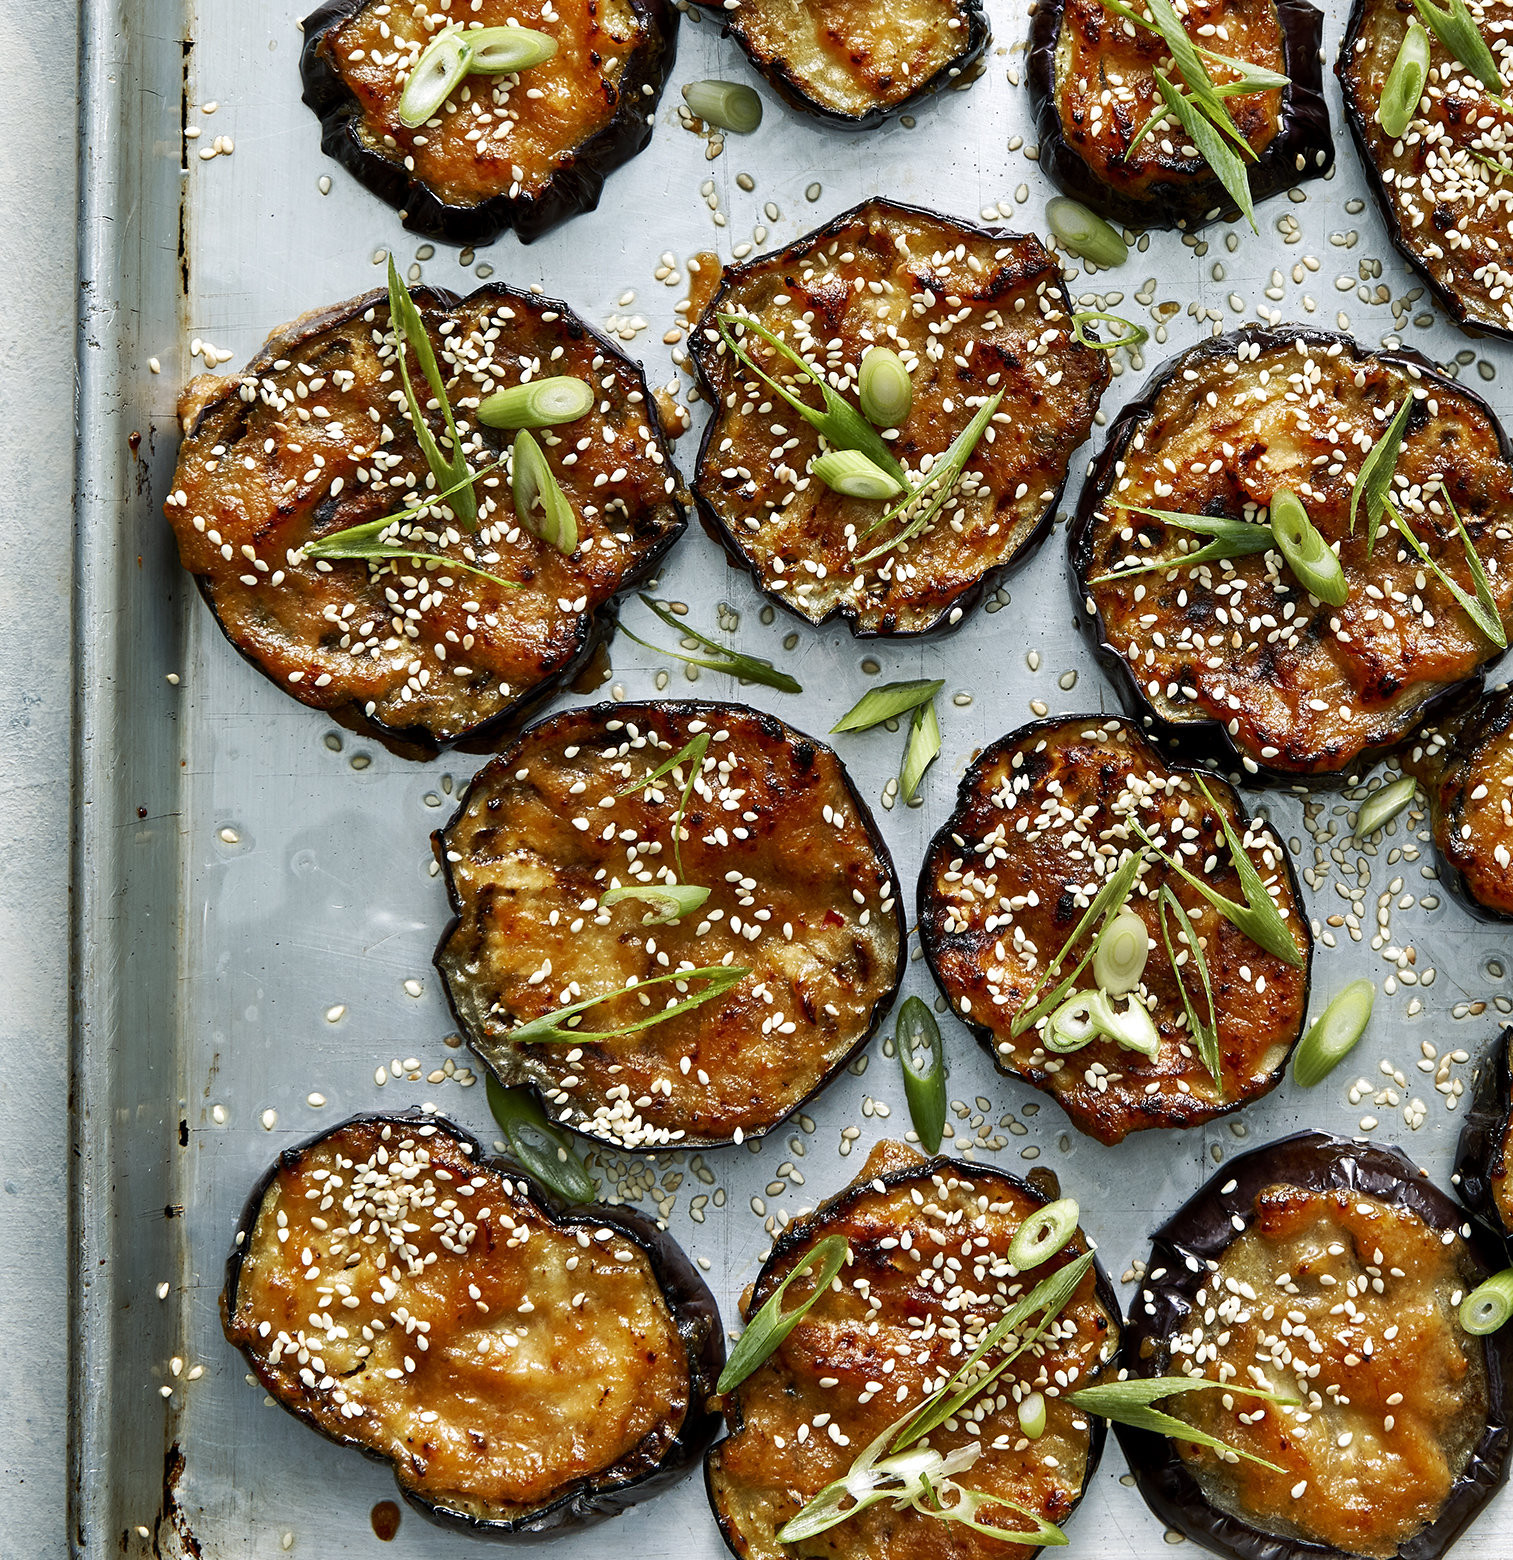 Simple Eggplant Recipes
 23 Easy Eggplant Recipes How to Cook and Choose